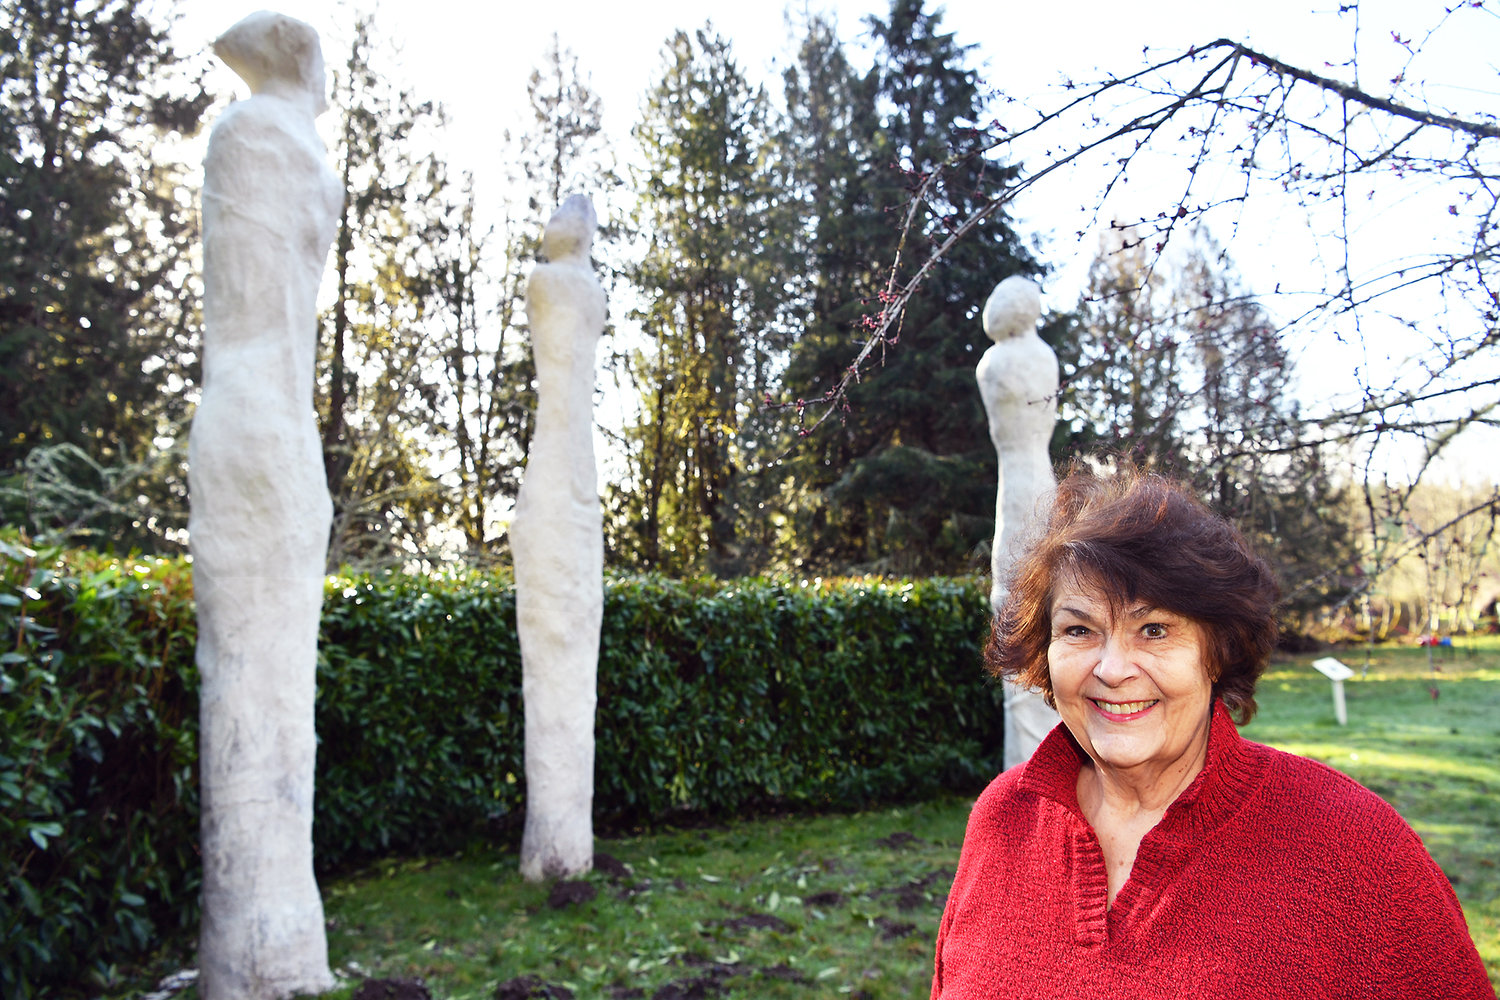 Rainier-area sculptor Myrna Orsini in front of her creation "Three Graces," a featured piece in her Monarch Sculpture Park.